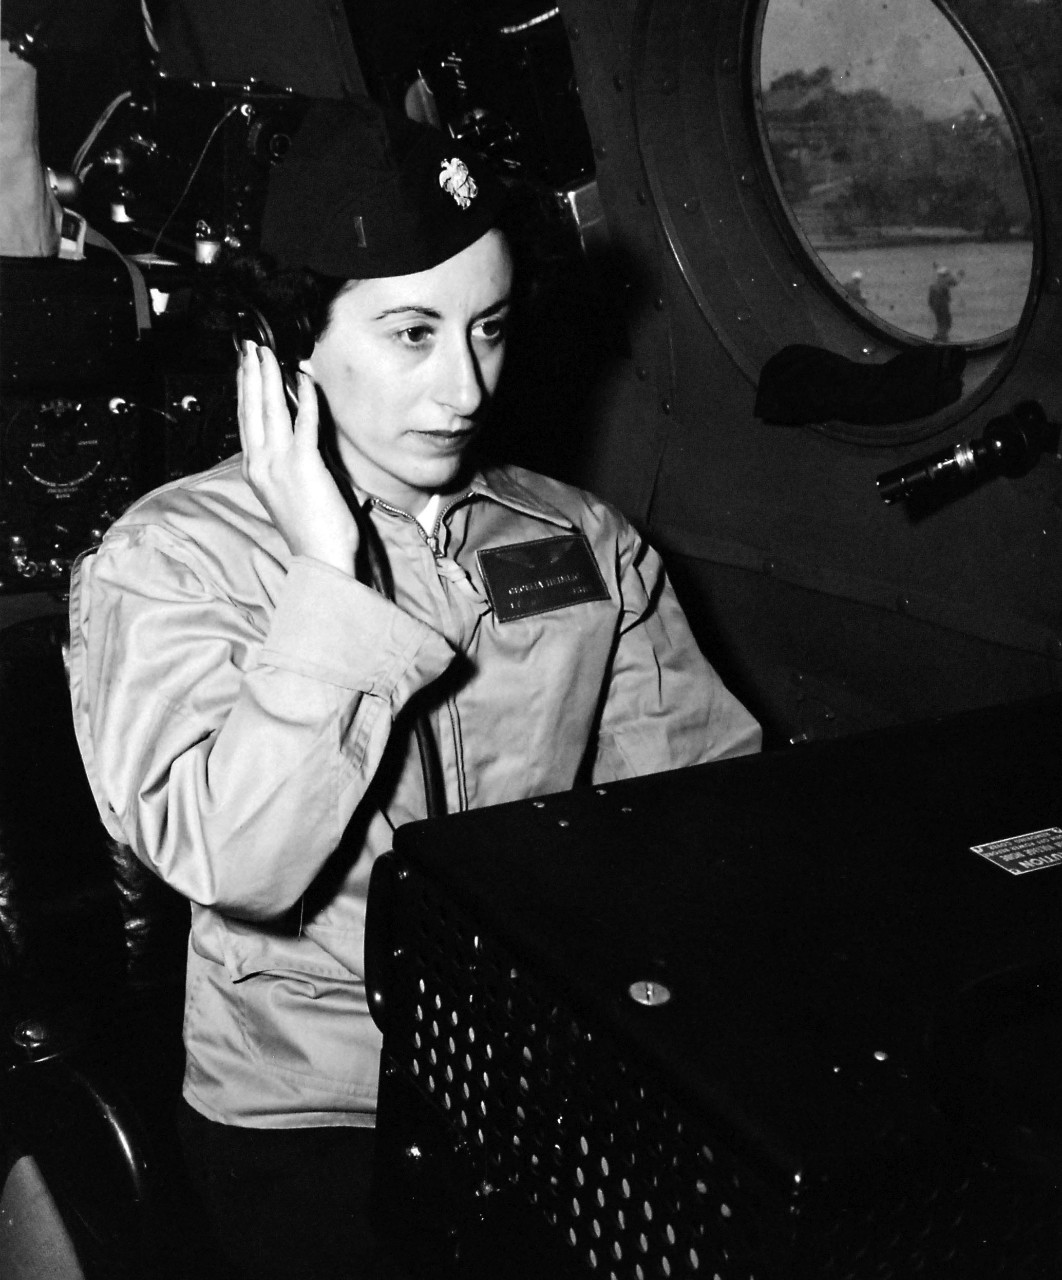 80-G-49789: Flight Jacket, April 1945.   WAVE Naval air navigator at her job at Naval Air Station, San Diego, California.   Lieutenant Junior Grade Celilia Heimlich, using equipment which enables an air navigator to obtain a “fix” through radio bearings while in flight.   Received April 7, 1945.   Official U.S. Navy photograph, now in the collections of the National Archives.  